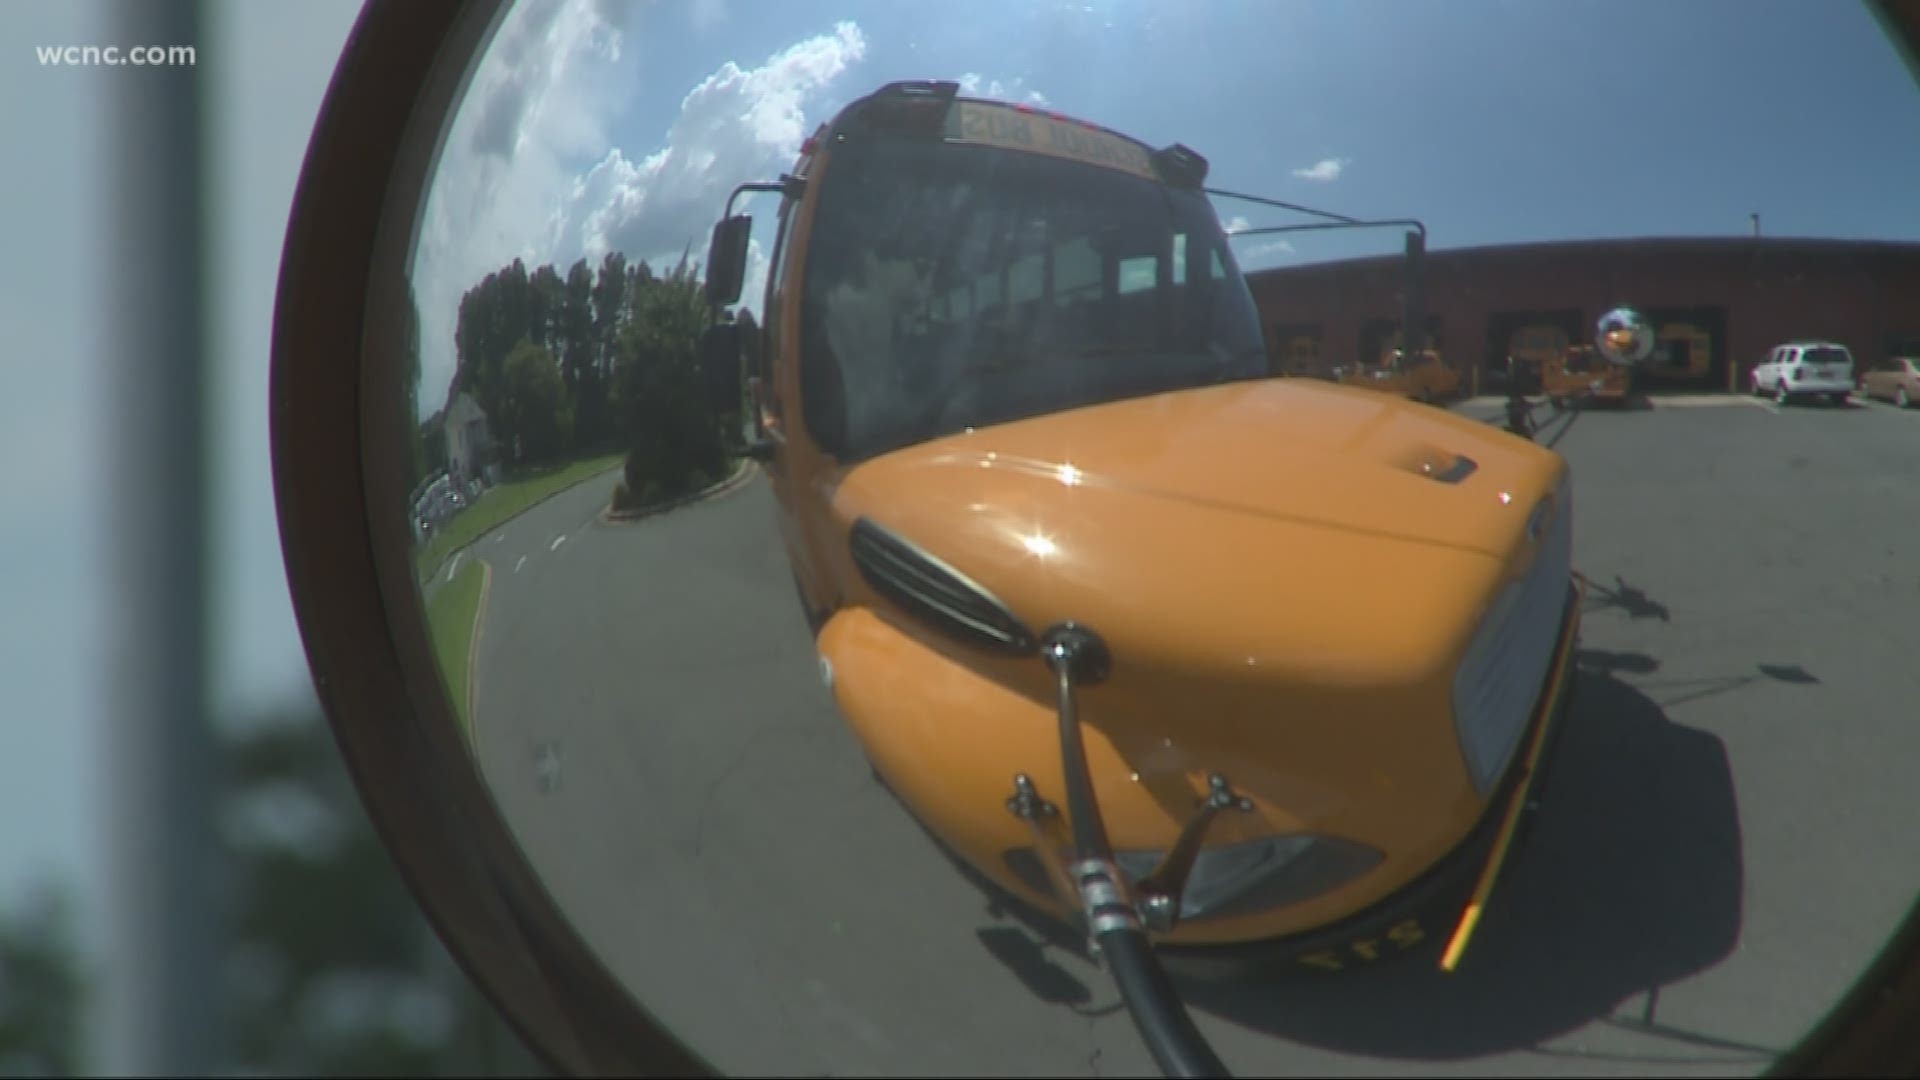 A state programs offers to upgrade buses for free so they can have seatbelts, but only one area school is taking advantage.